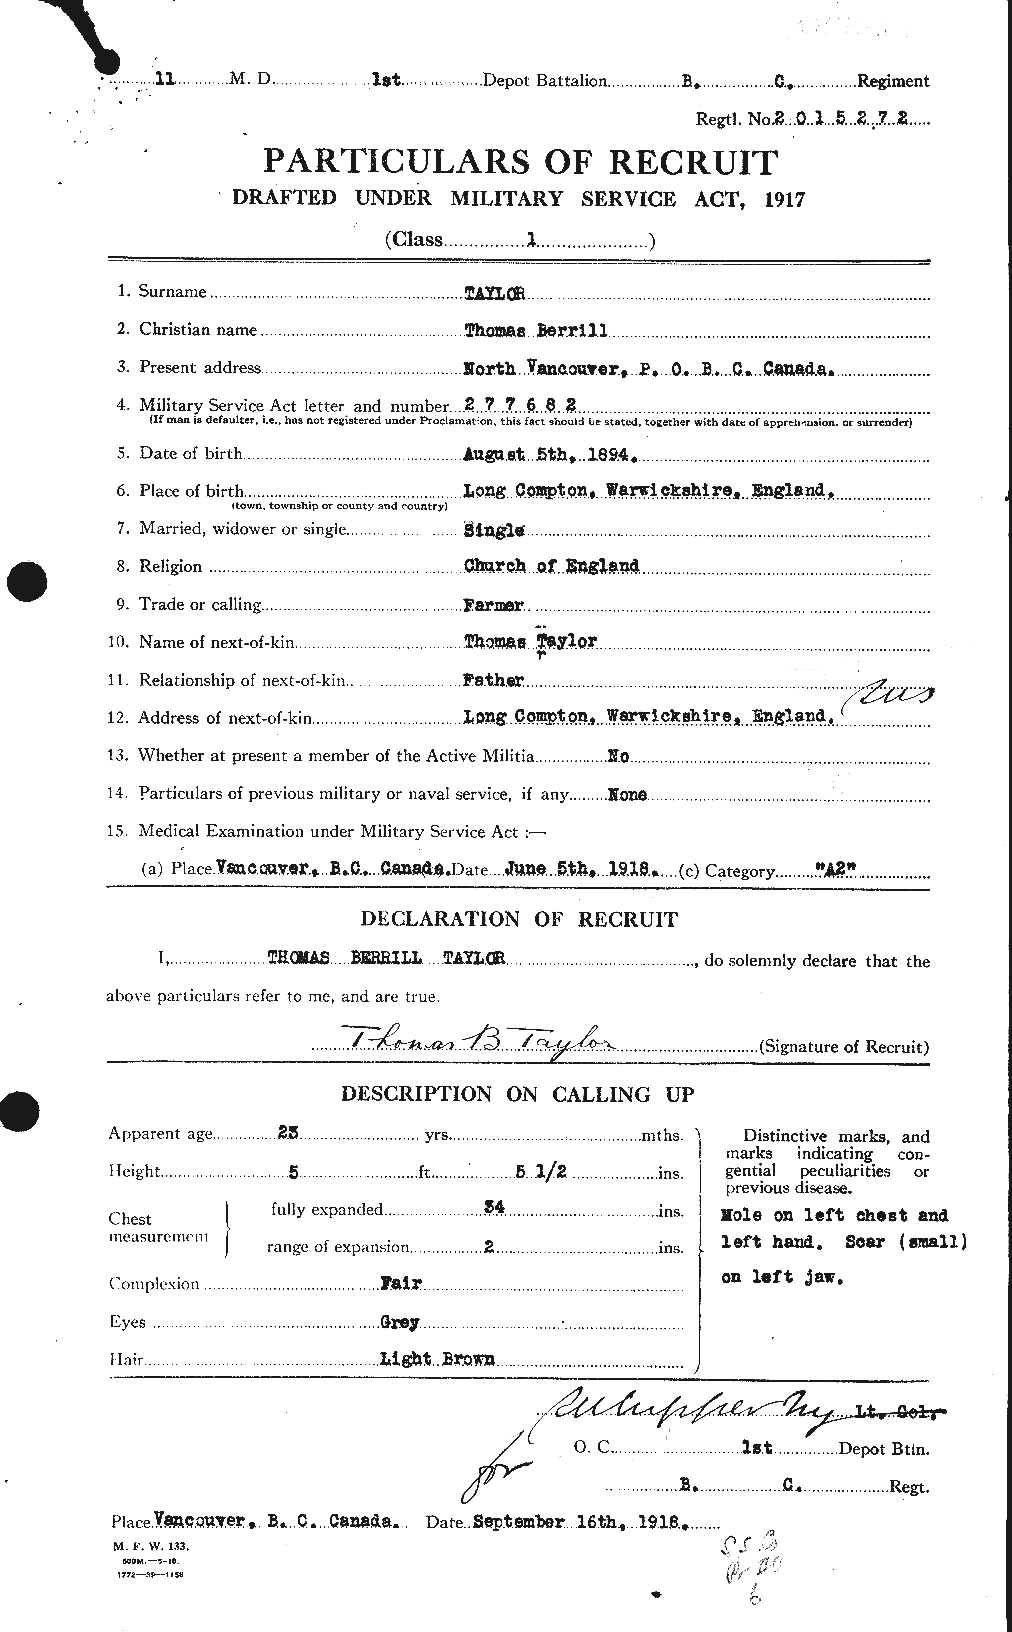 Personnel Records of the First World War - CEF 627972a